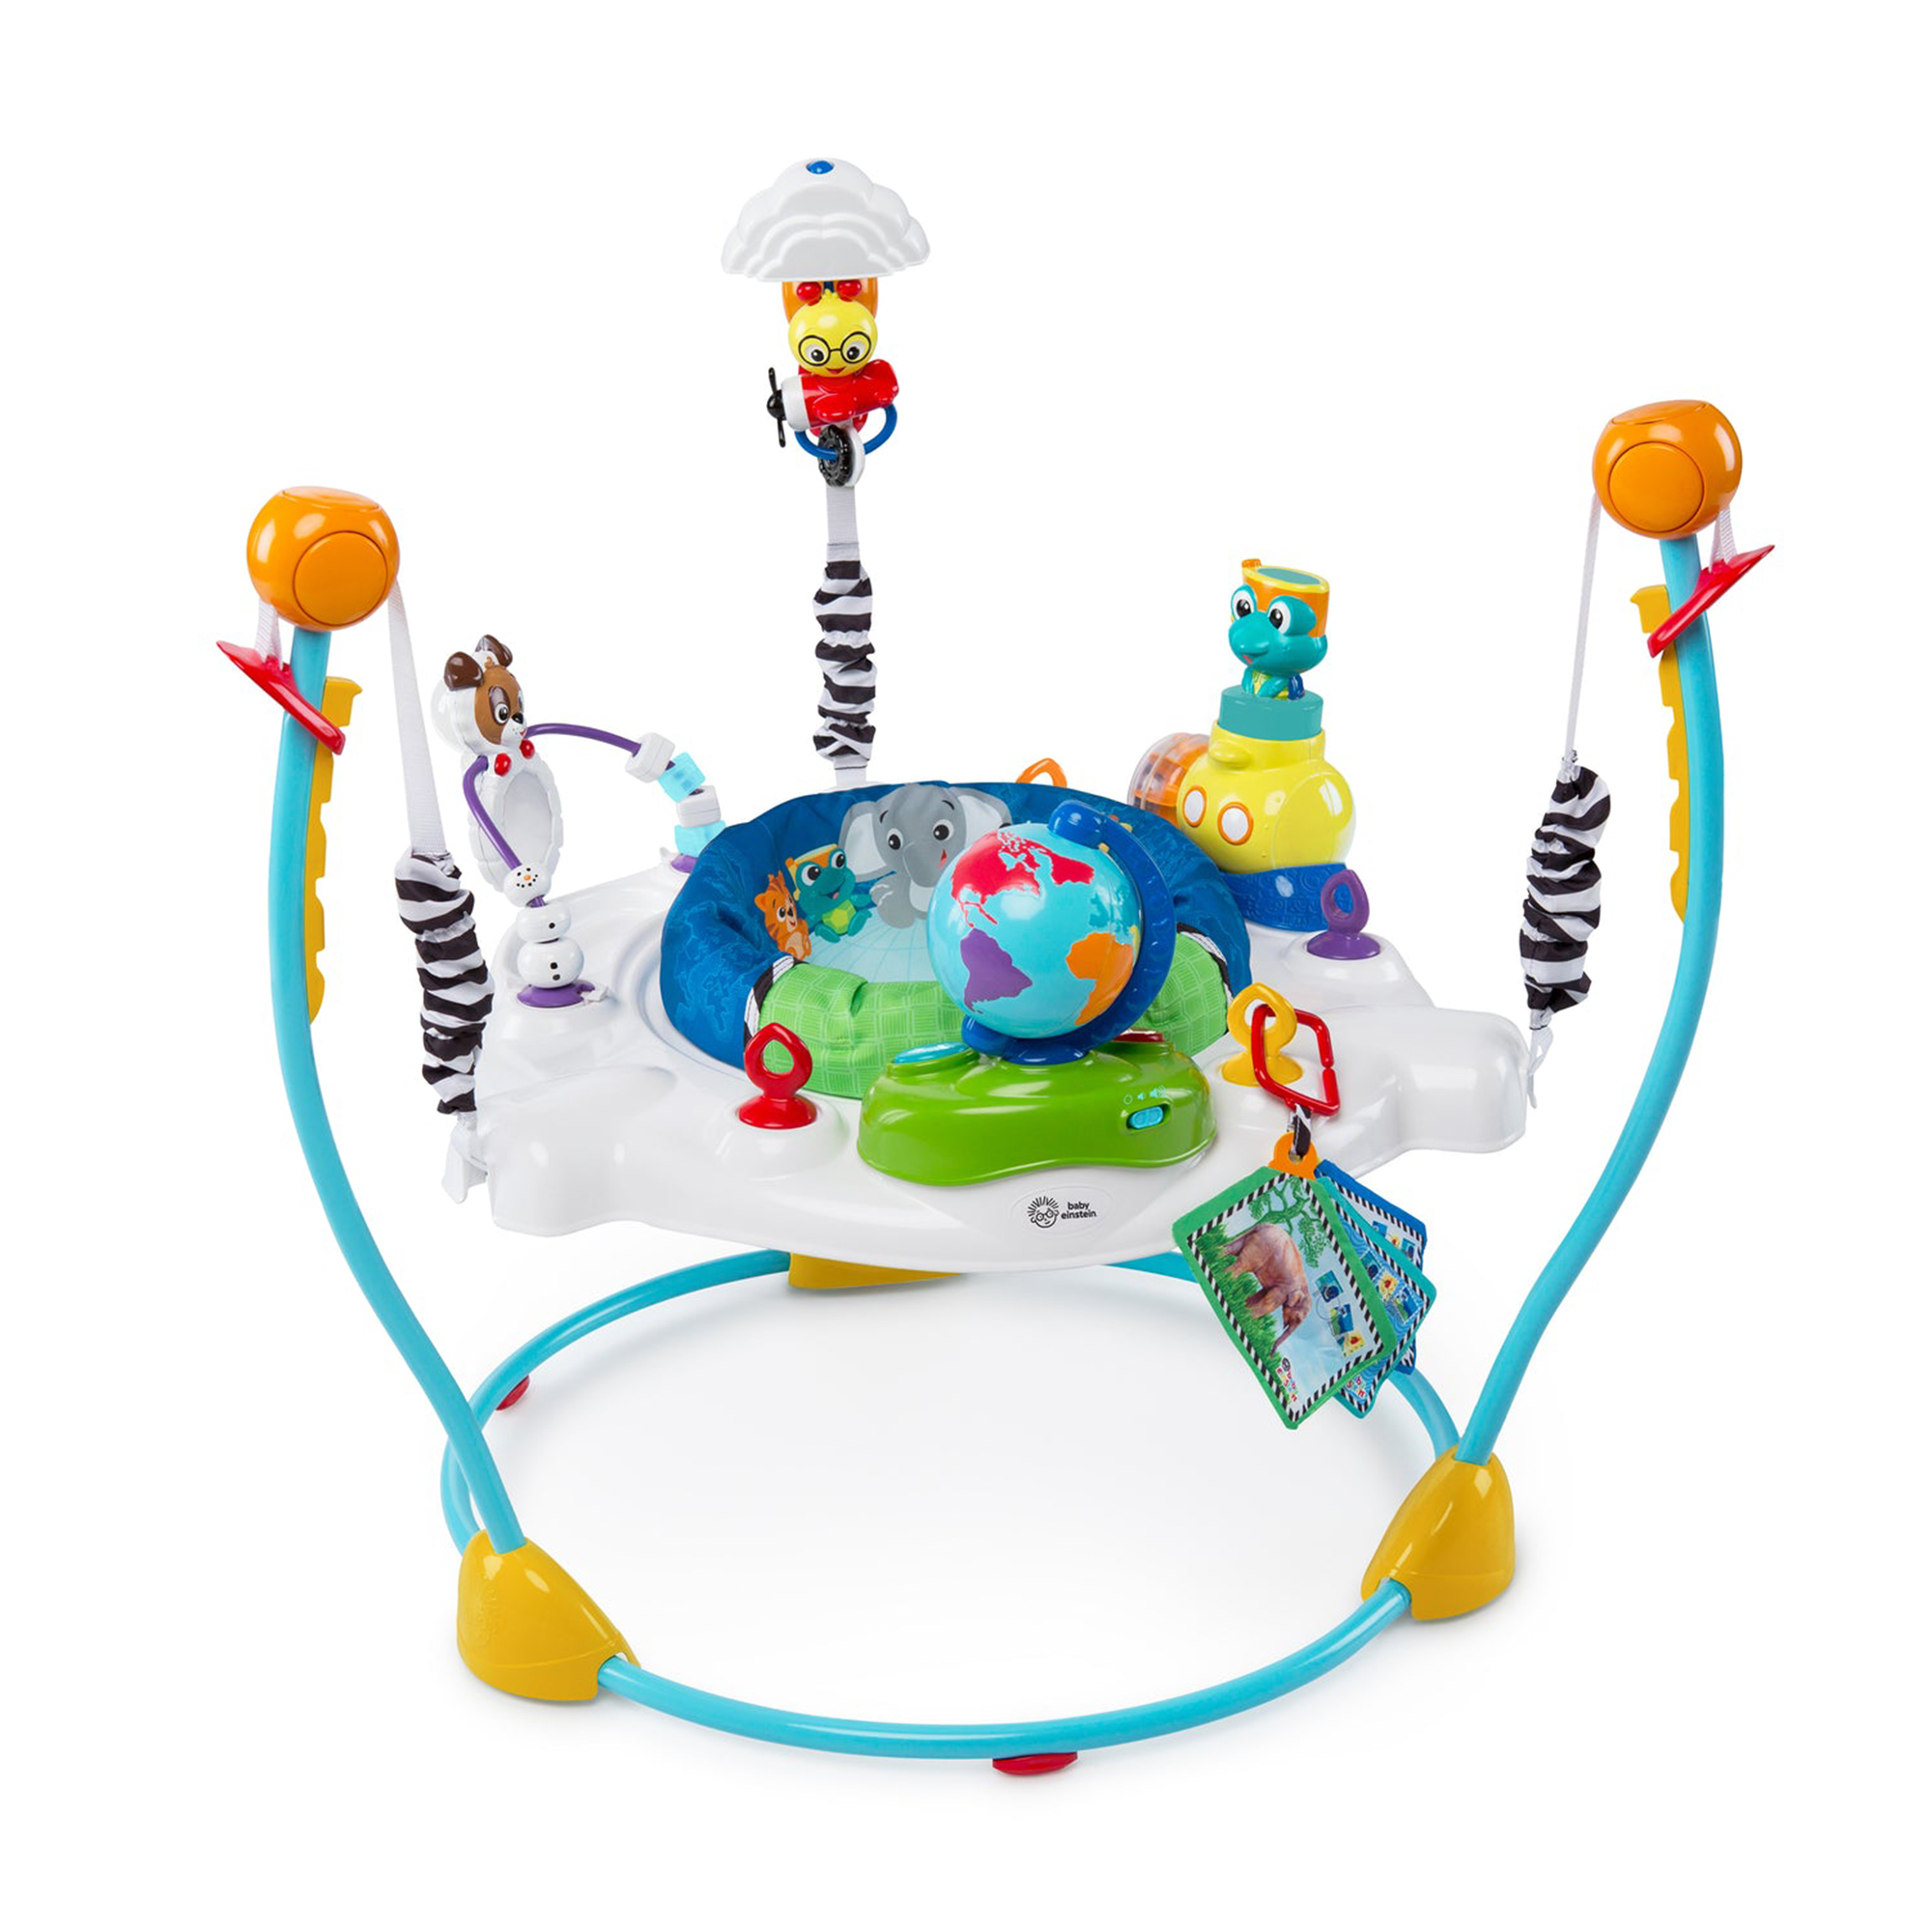 Baby Einstein Journey of Discovery Jumper Activity Center with Lights and Sounds - image 4 of 12